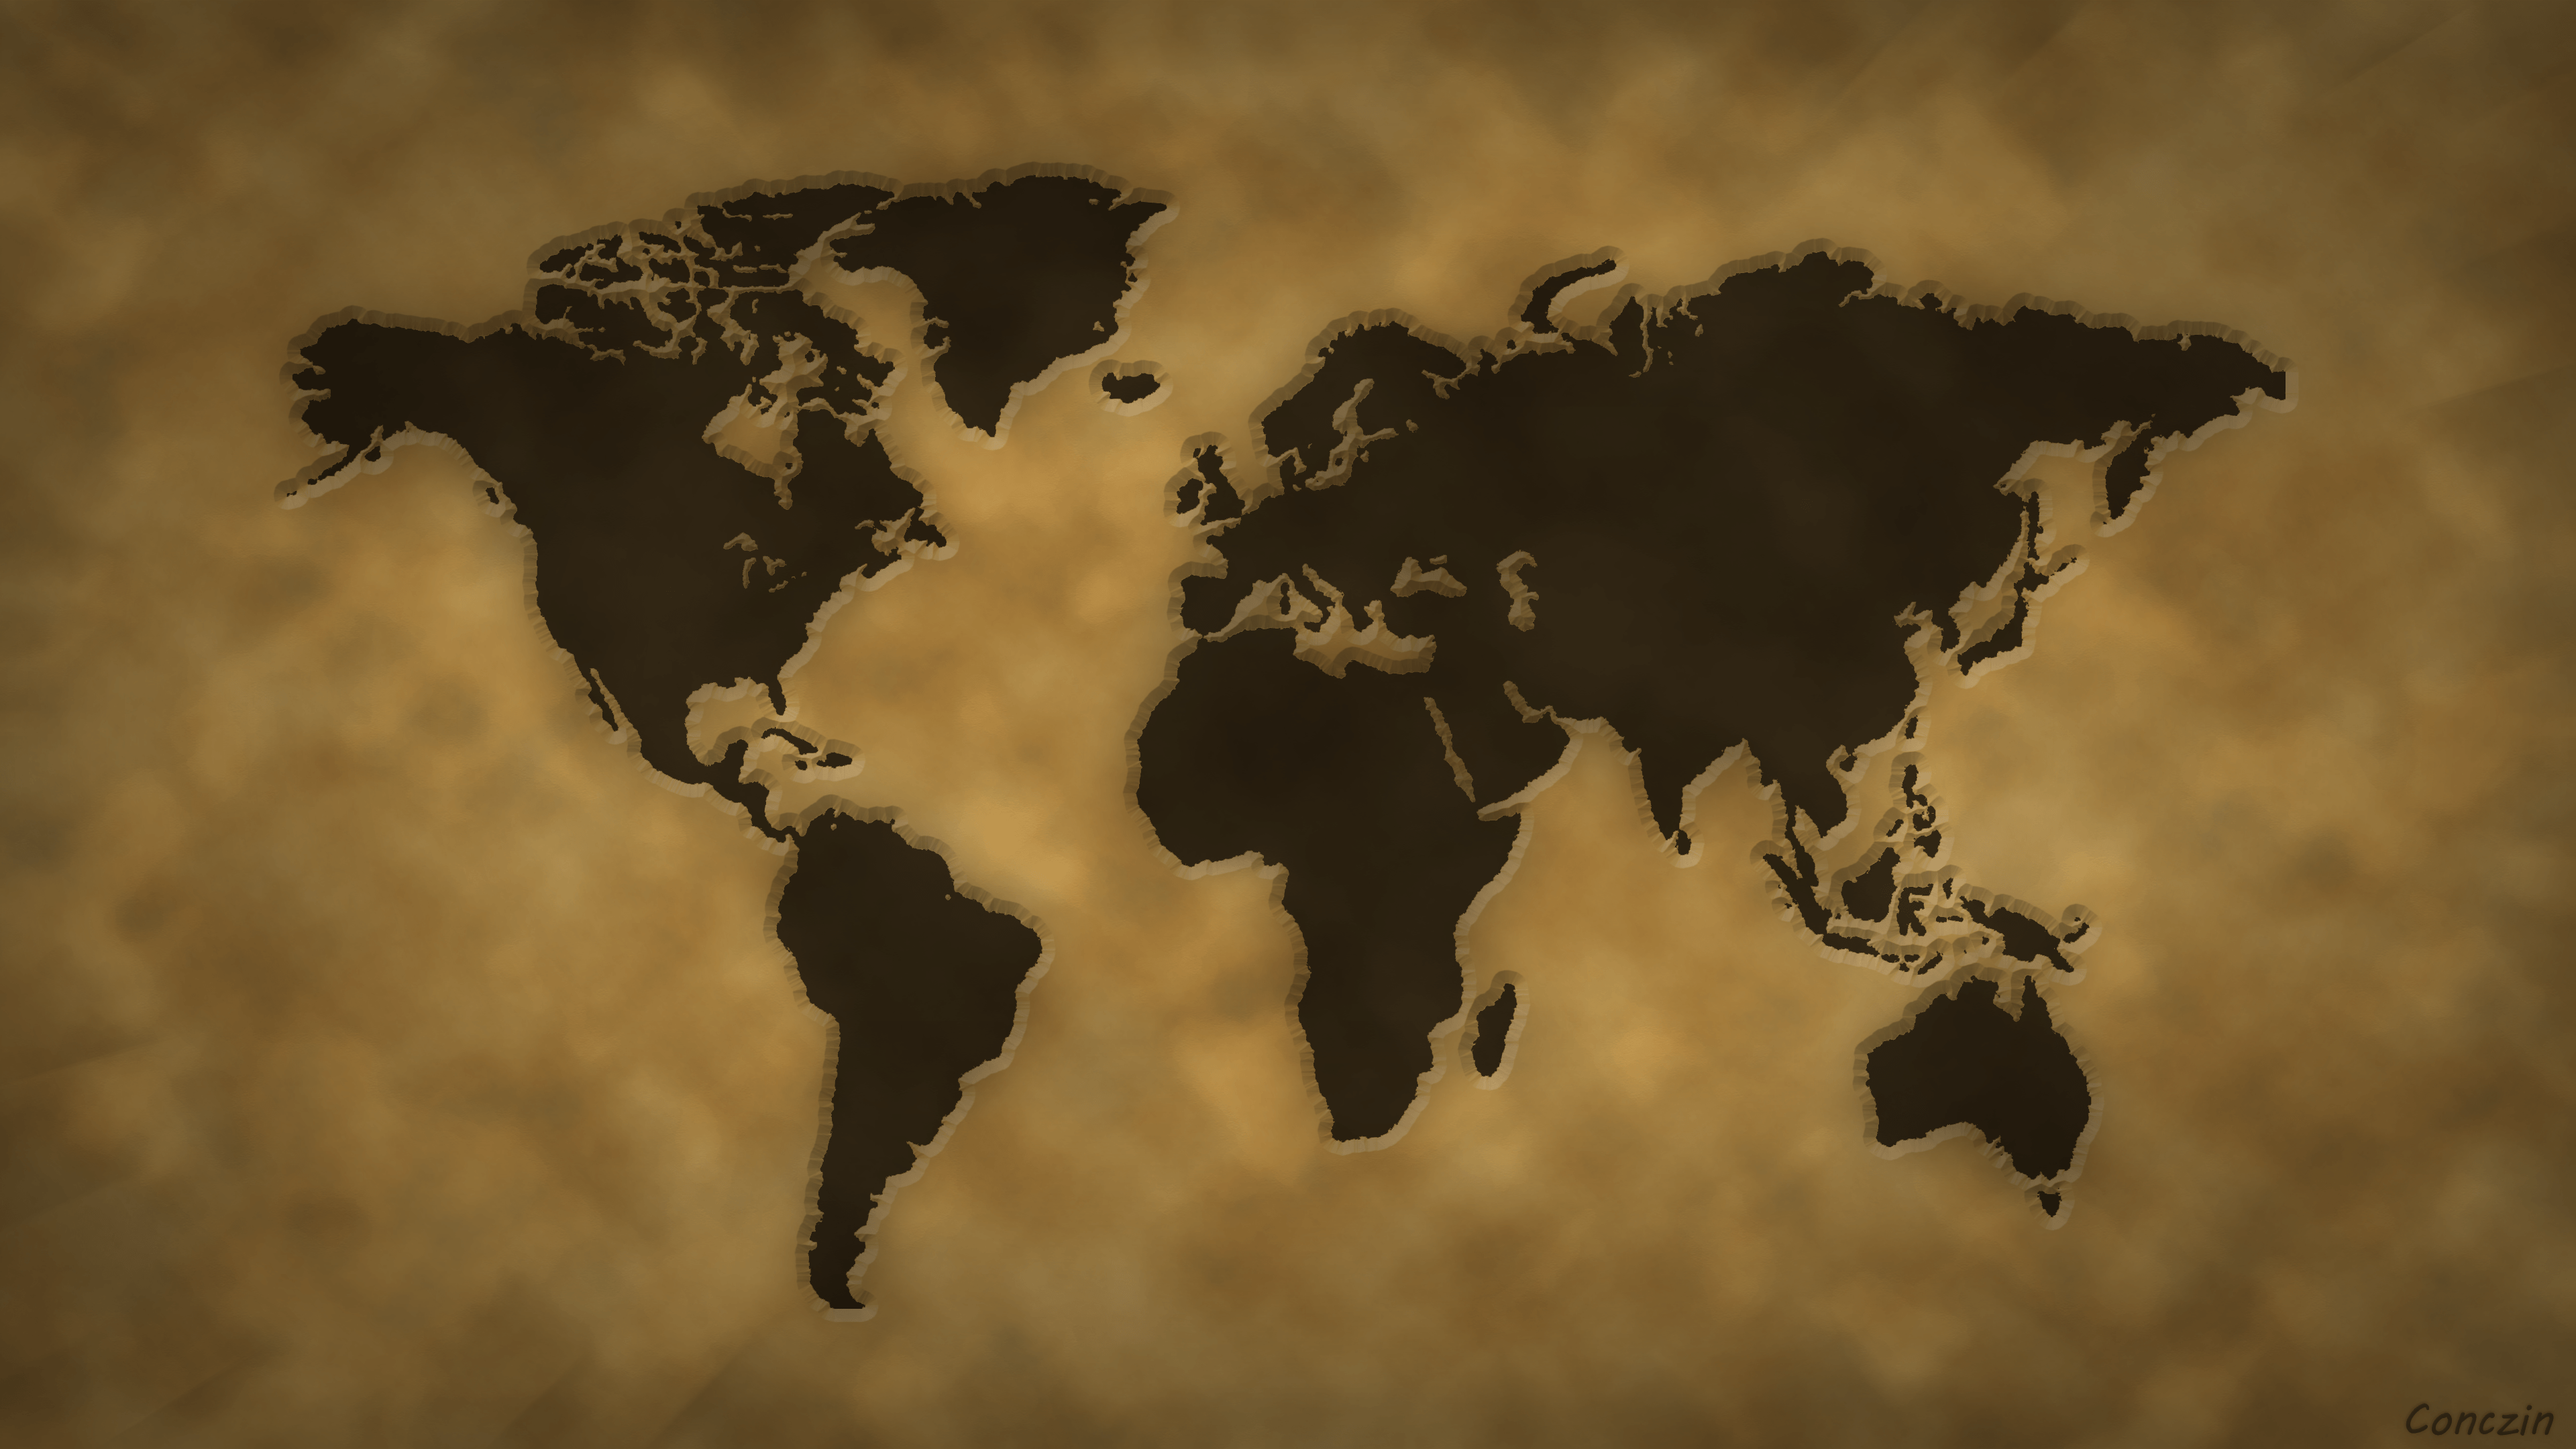 Old World Map 4k Ultra HD Wallpaper. Background Imagex2160